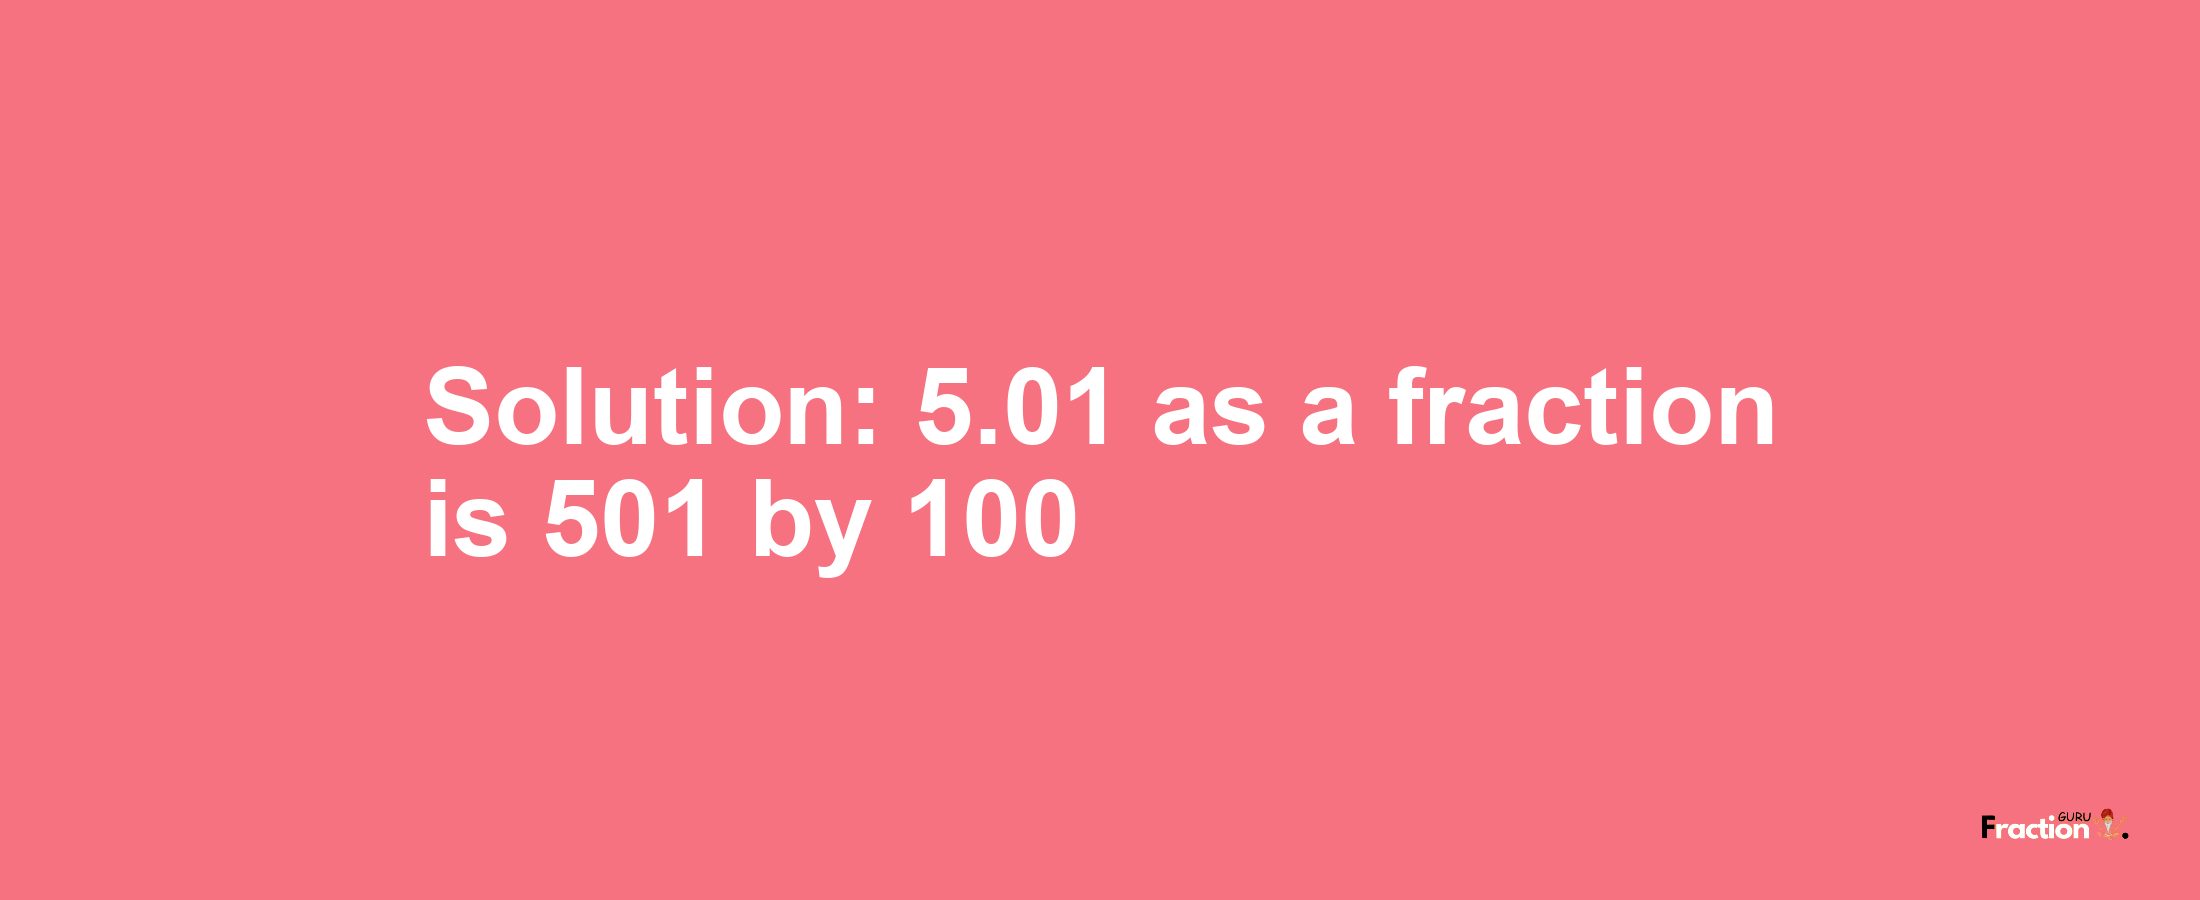 Solution:5.01 as a fraction is 501/100